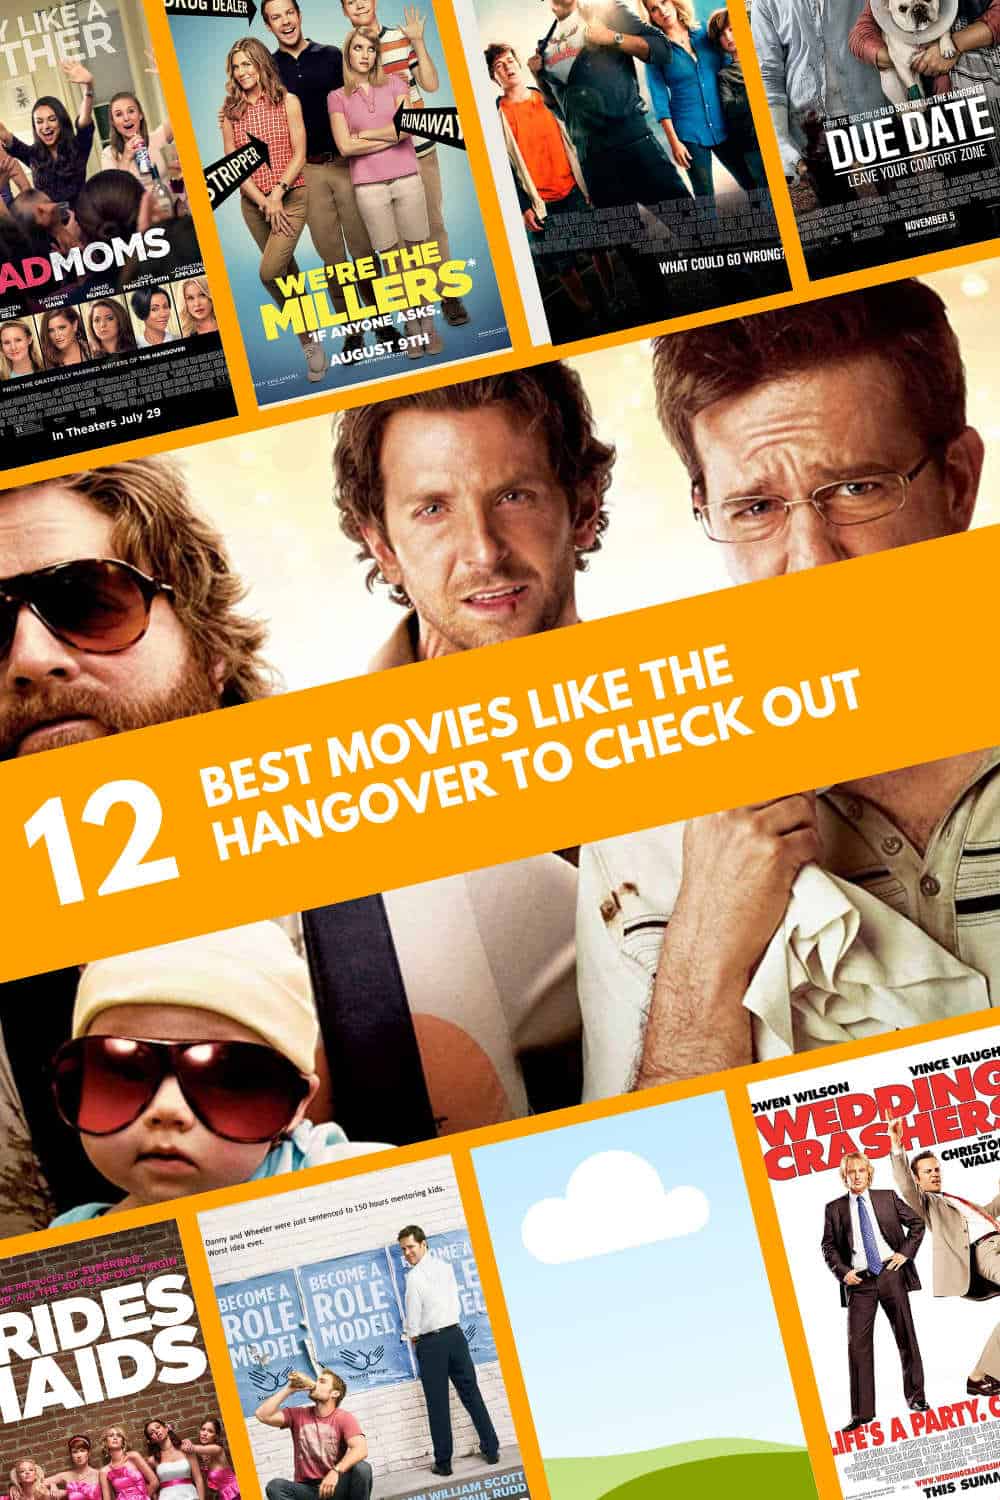 Movies Like The Hangover to Check Out